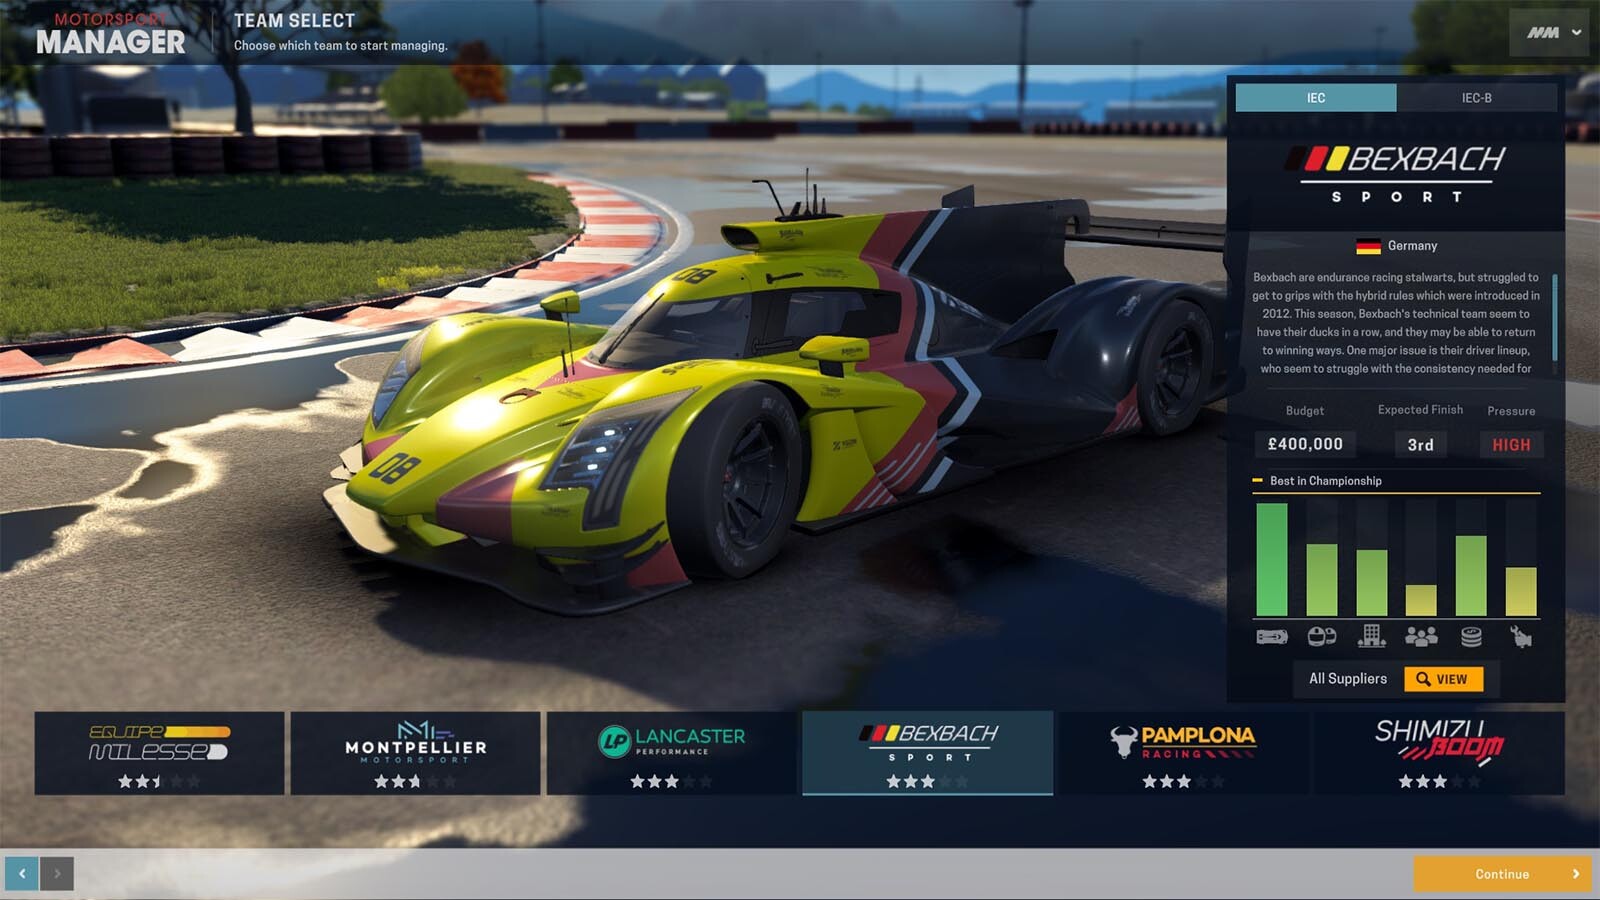 Motorsport Manager - Endurance Series DLC Steam Key for PC, Mac and Linux Buy now